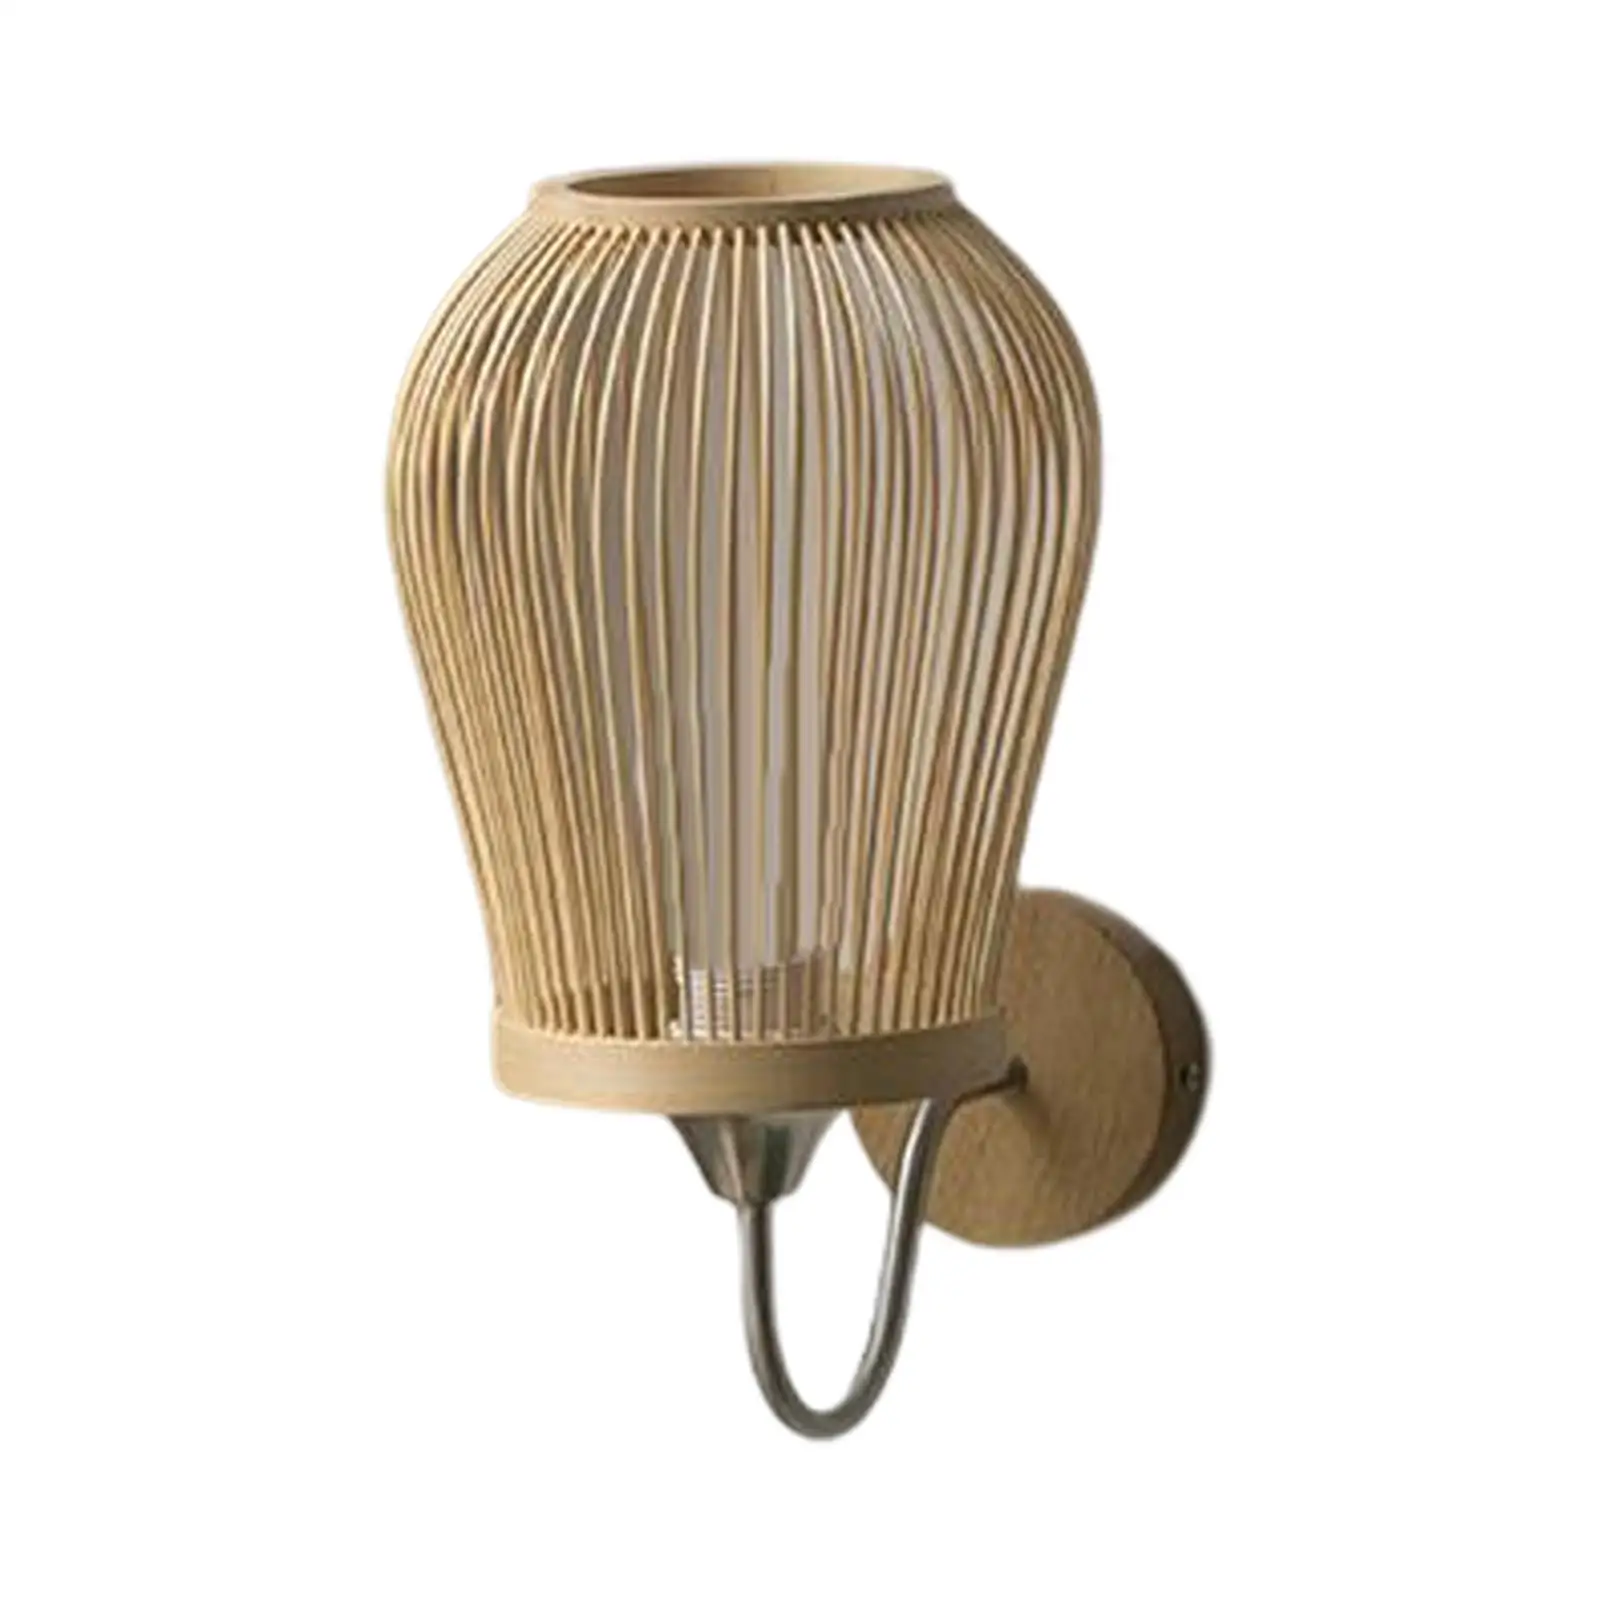 Bamboo Wall Mounted Sconce Lamp Light Lighting Fixture for Room Decor